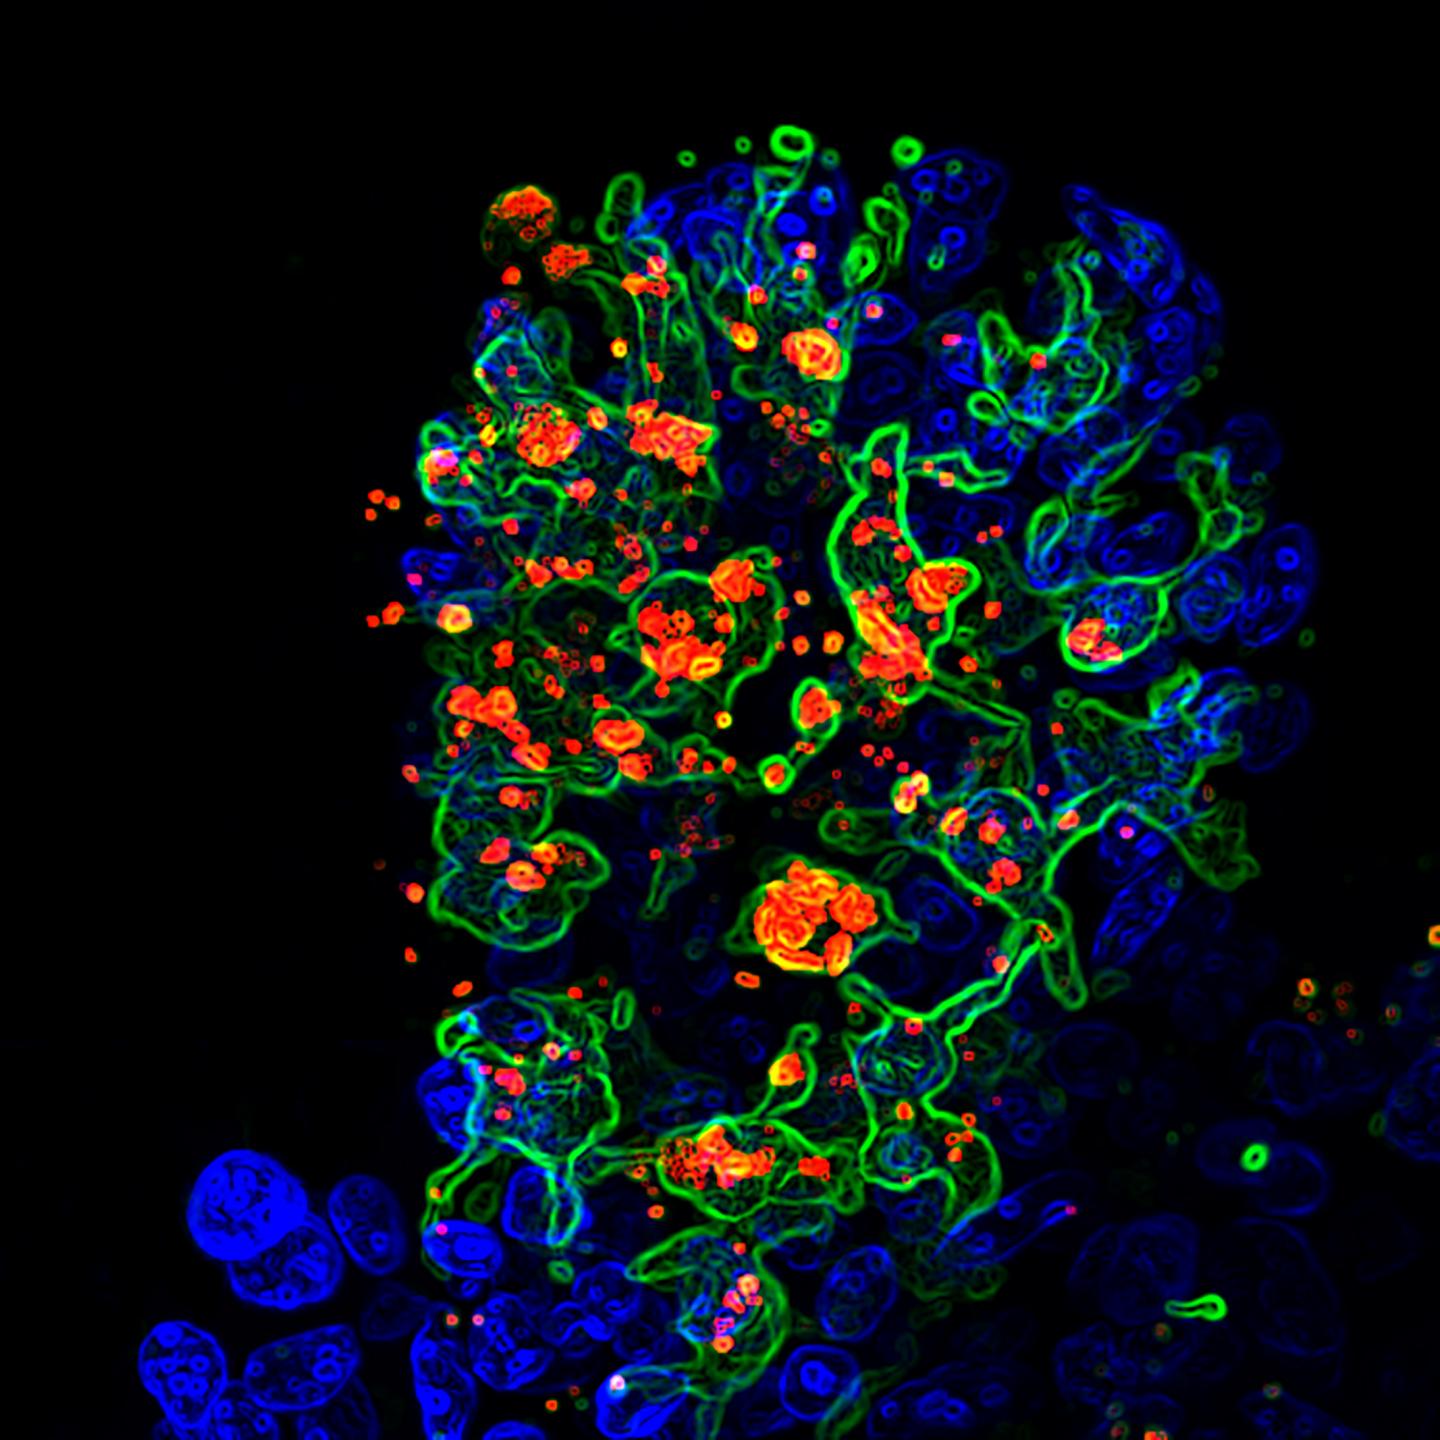 Opportunistic Fungus Called Candida albicans (Red) Engulfed by CX3CR1+ Phagocytes (Green)